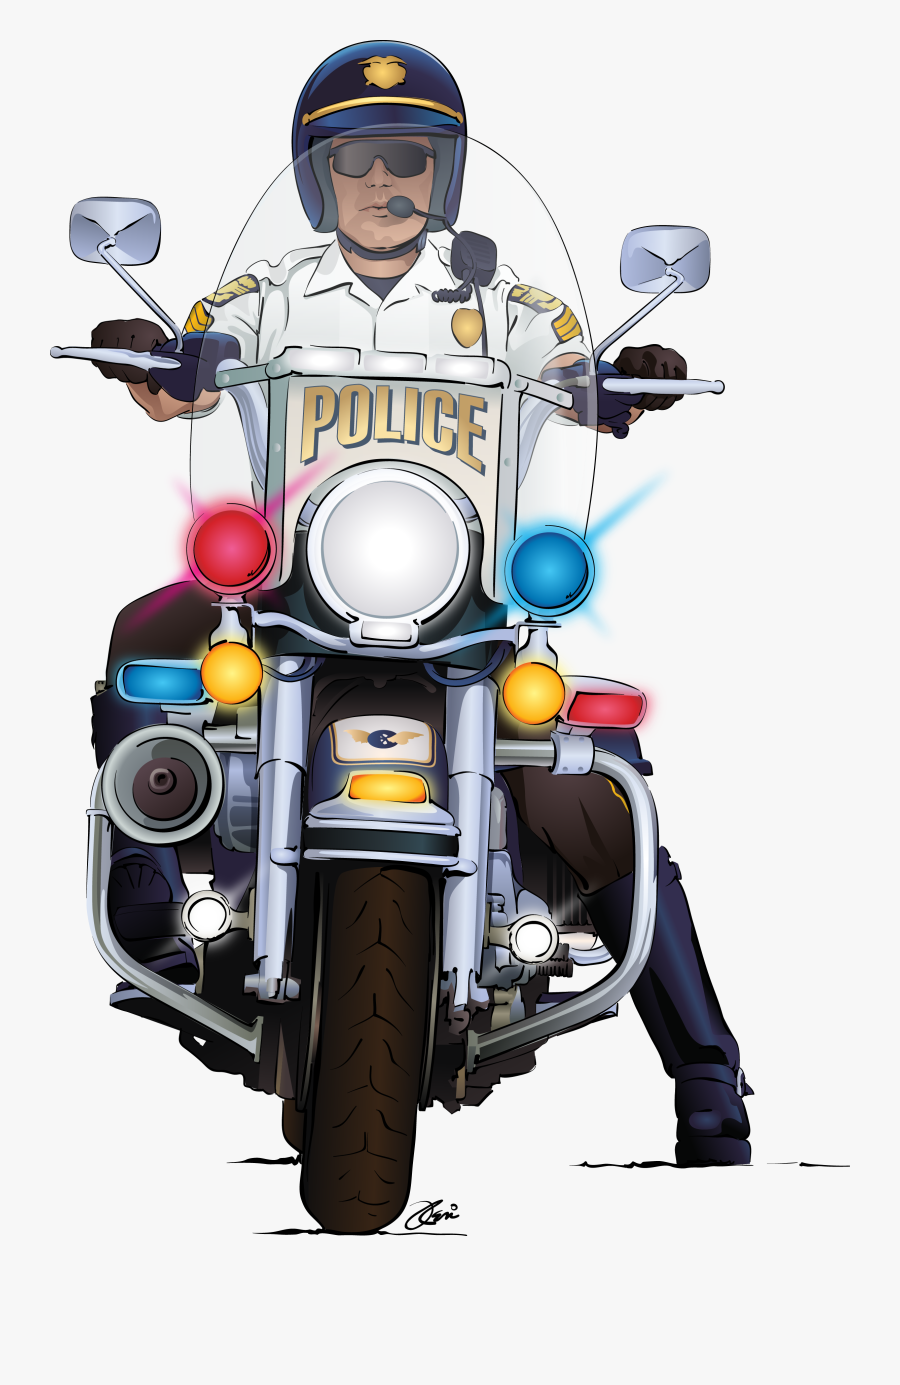 Police Motorcycle Animation Transparent, Transparent Clipart